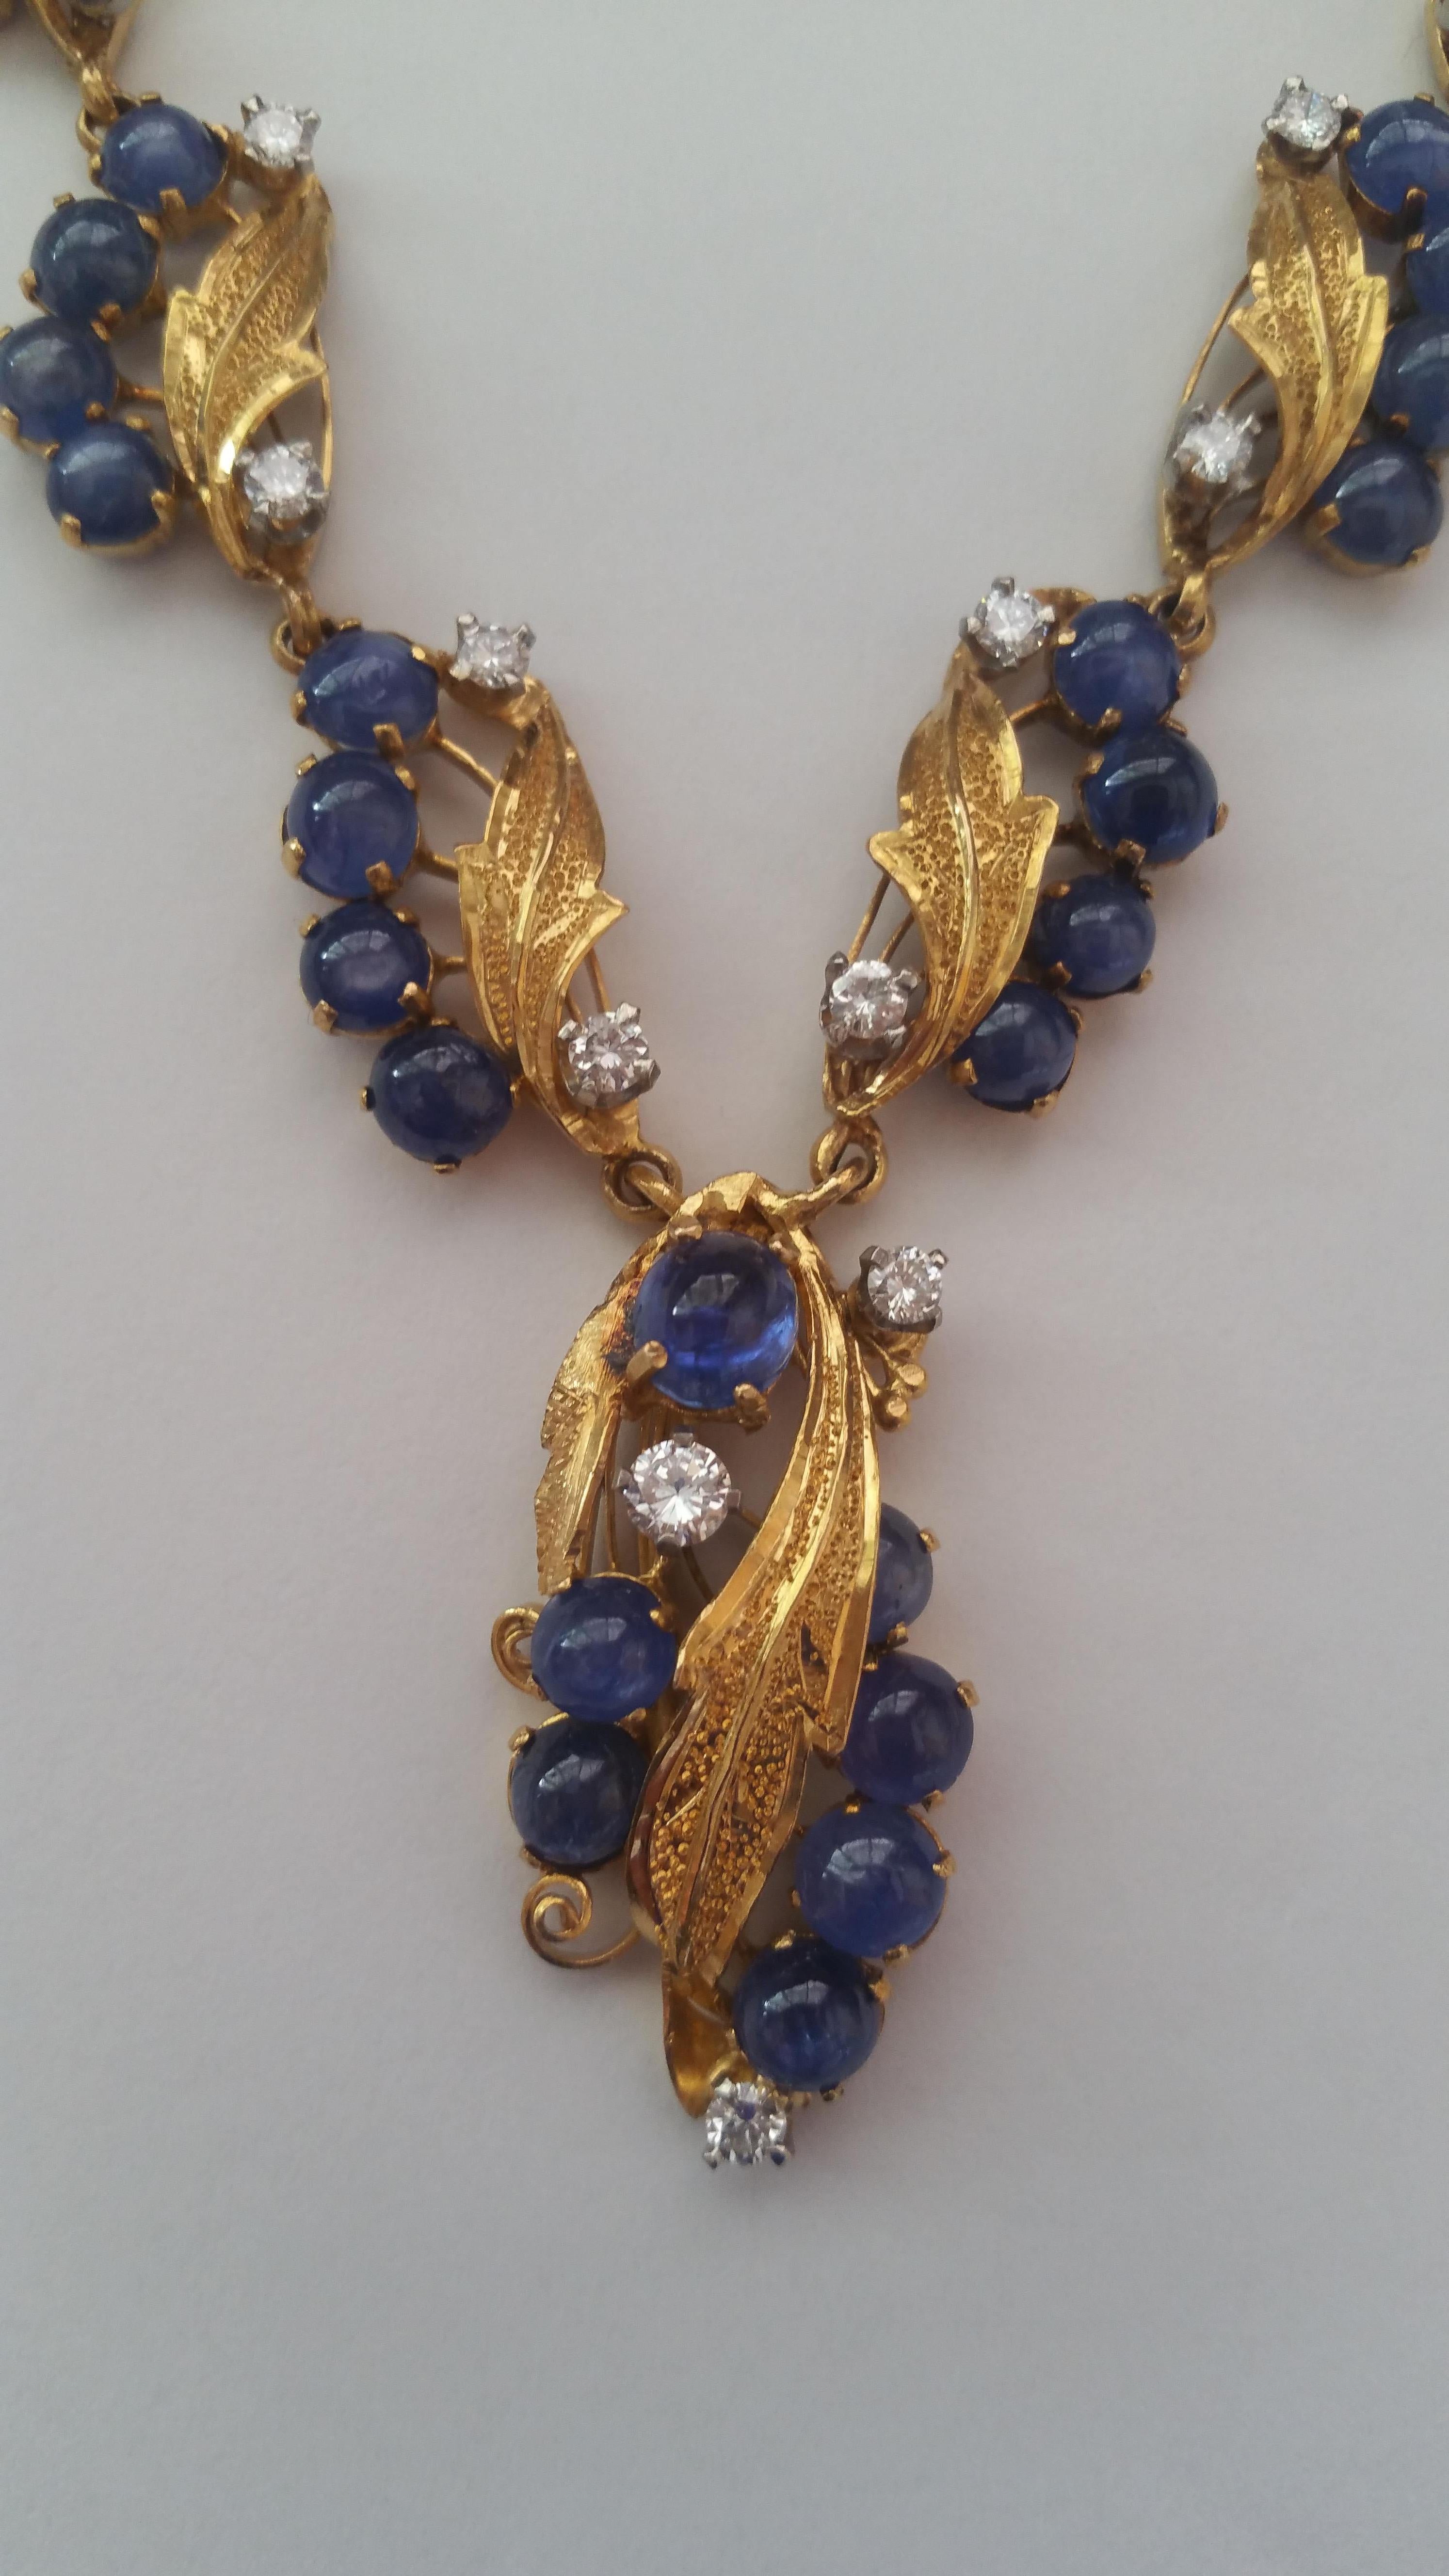 Vintage 20kt Yellow Gold, Sapphire, Diamond Necklace Cabochon Sapphires of 13.53 cttw, Diamonds of 1.67 cttw 18 inches plus dangle

Statement necklace with fine leaf detail featuring fine blue cabochon sapphires of 13.53cttw and round brilliant